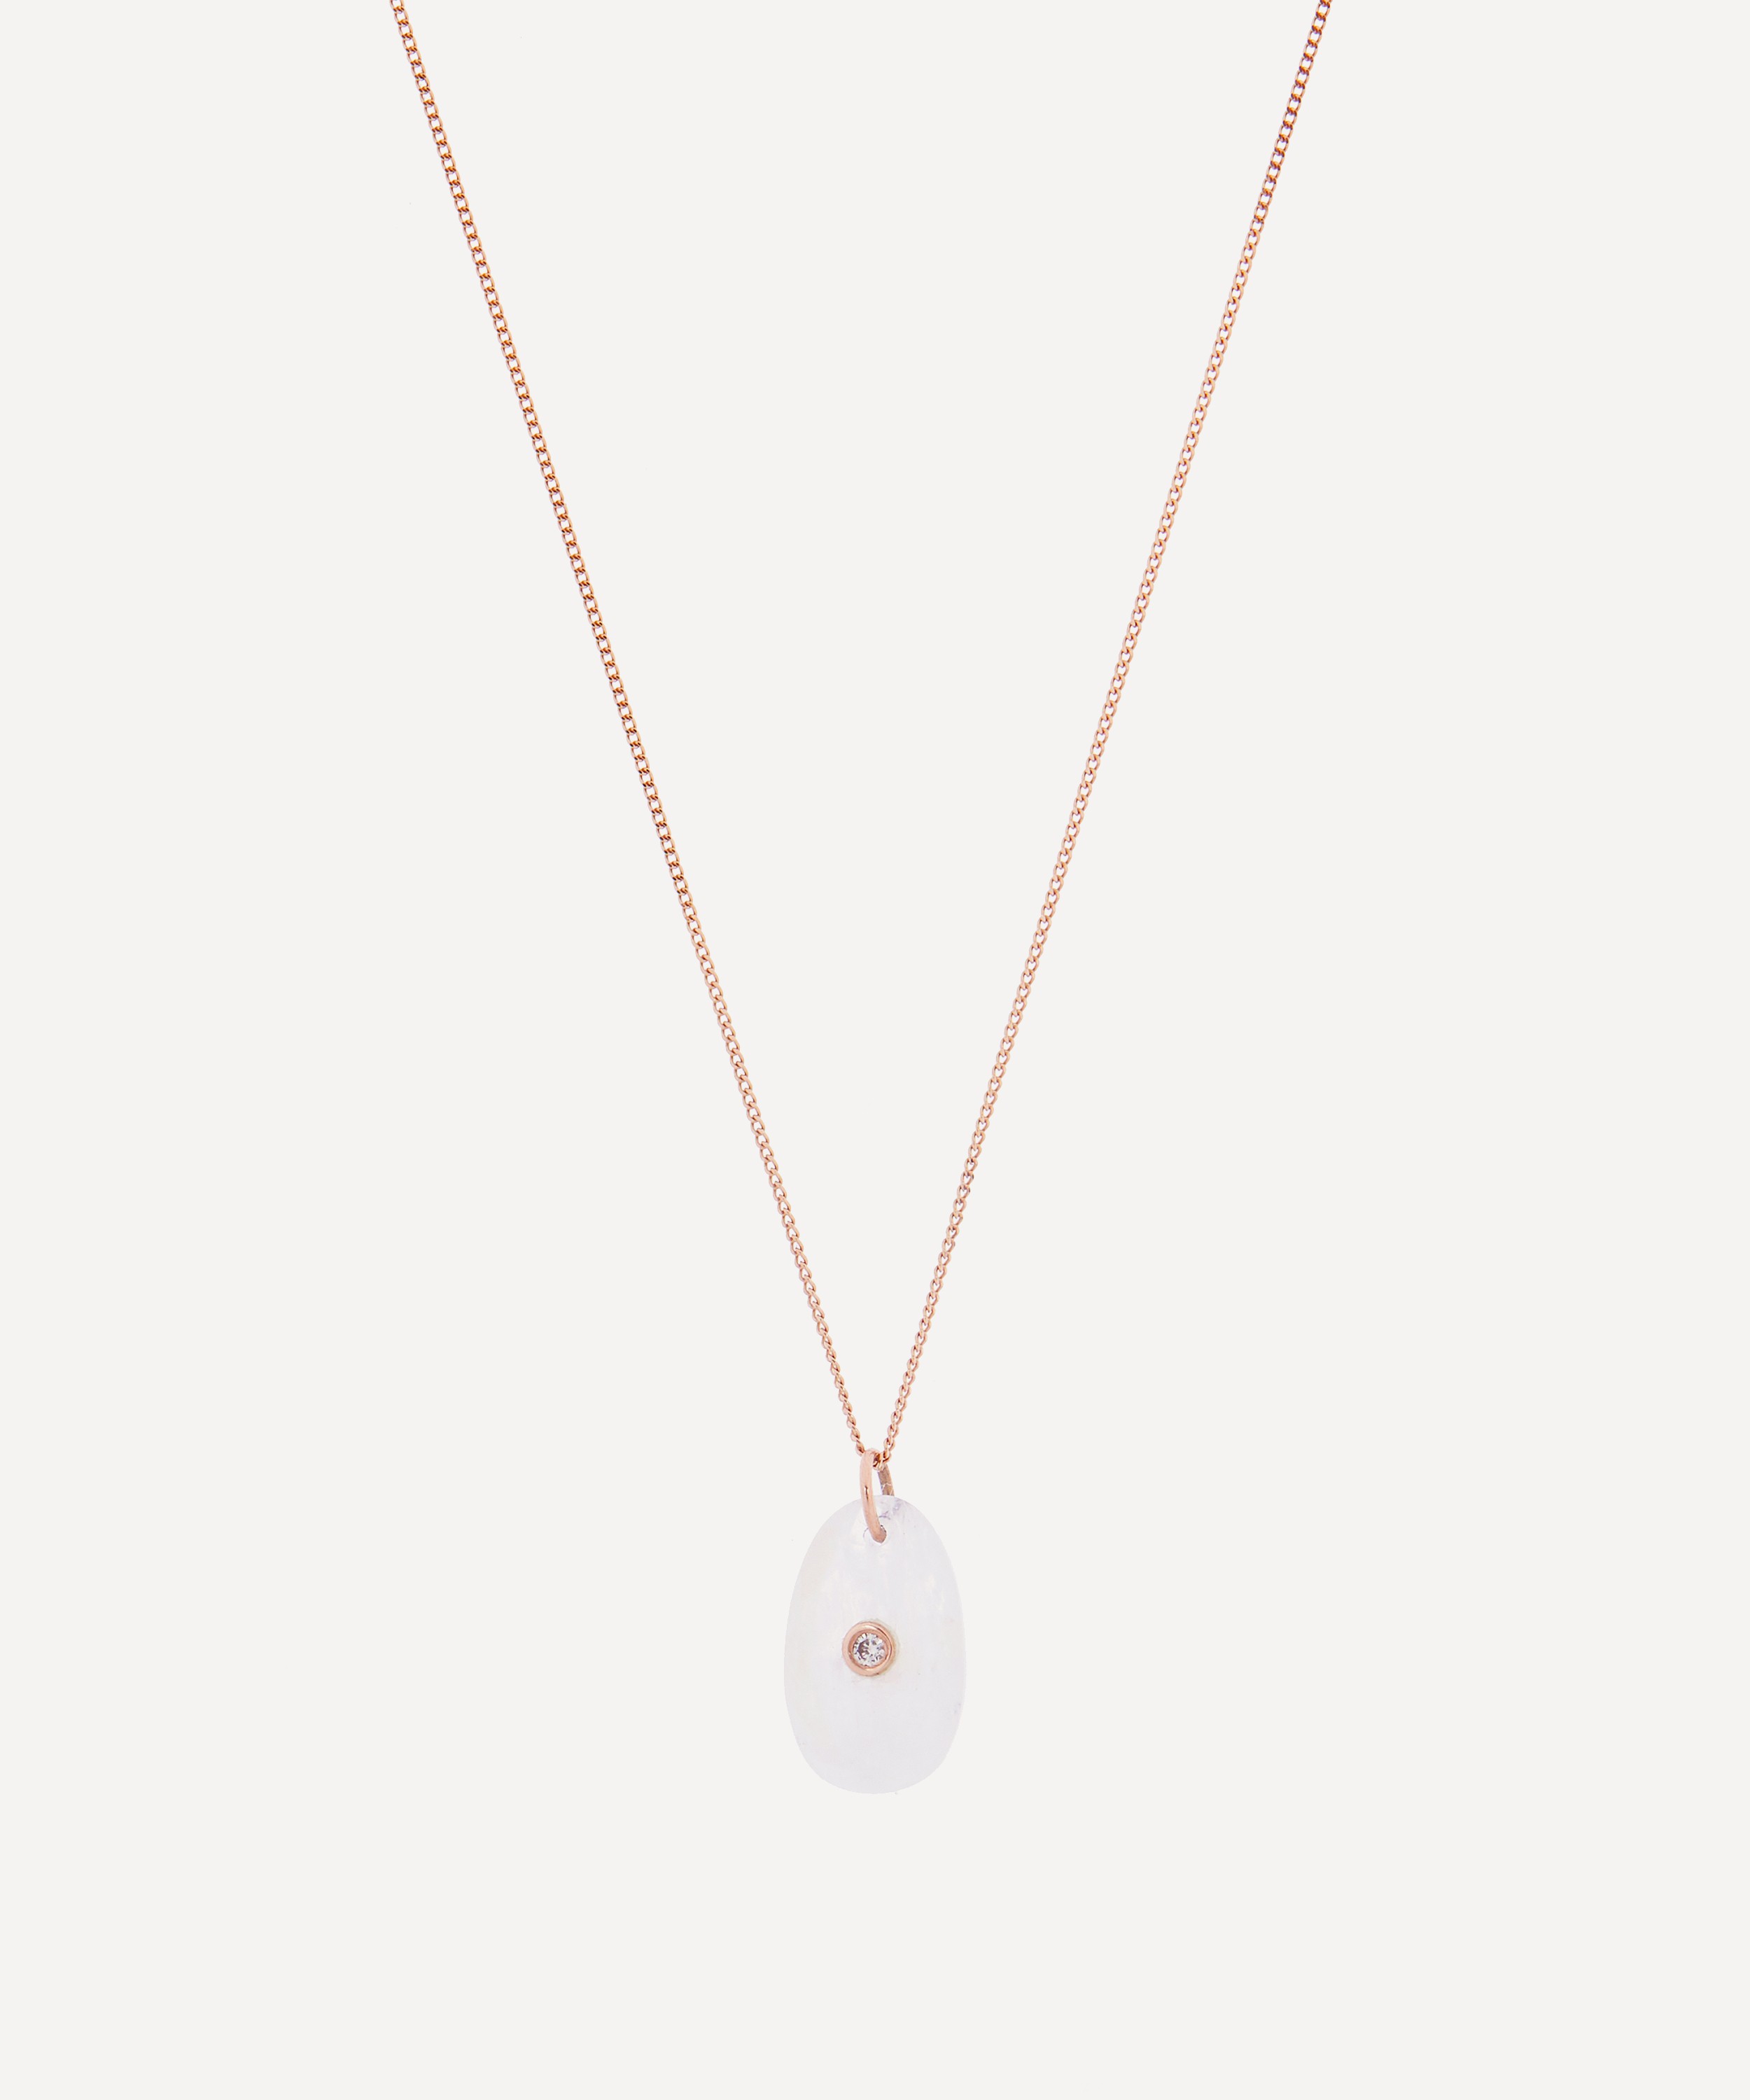 Pascale Monvoisin - 14ct Rose Gold Orso N°1 Moonstone and Diamond Pendant Necklace